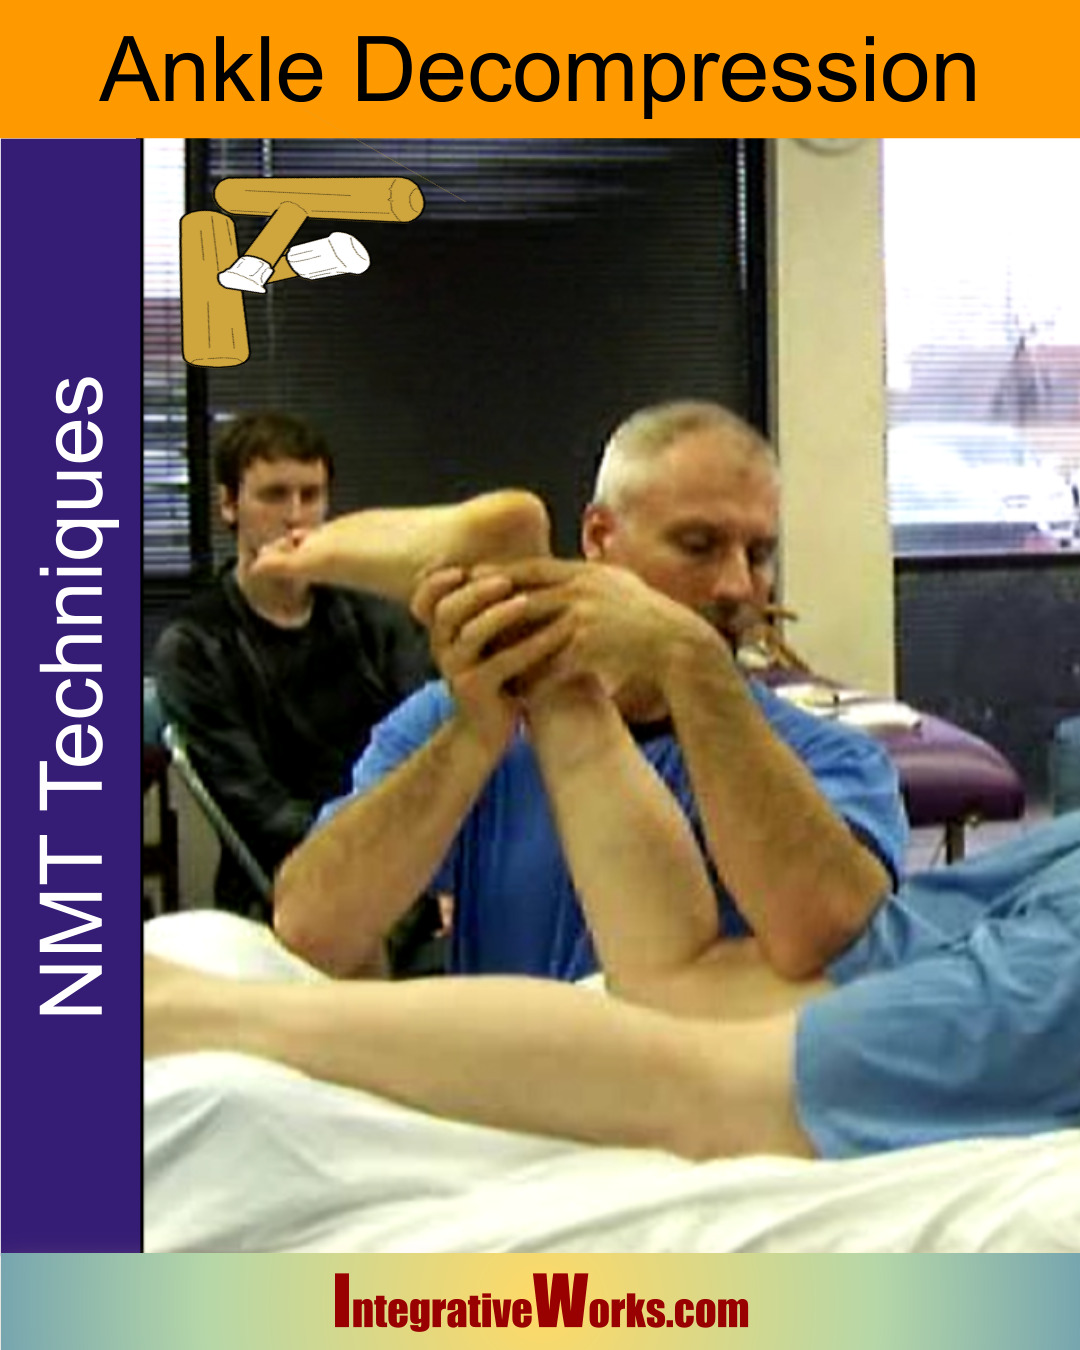 NMT Protocol – Ankle Decompression